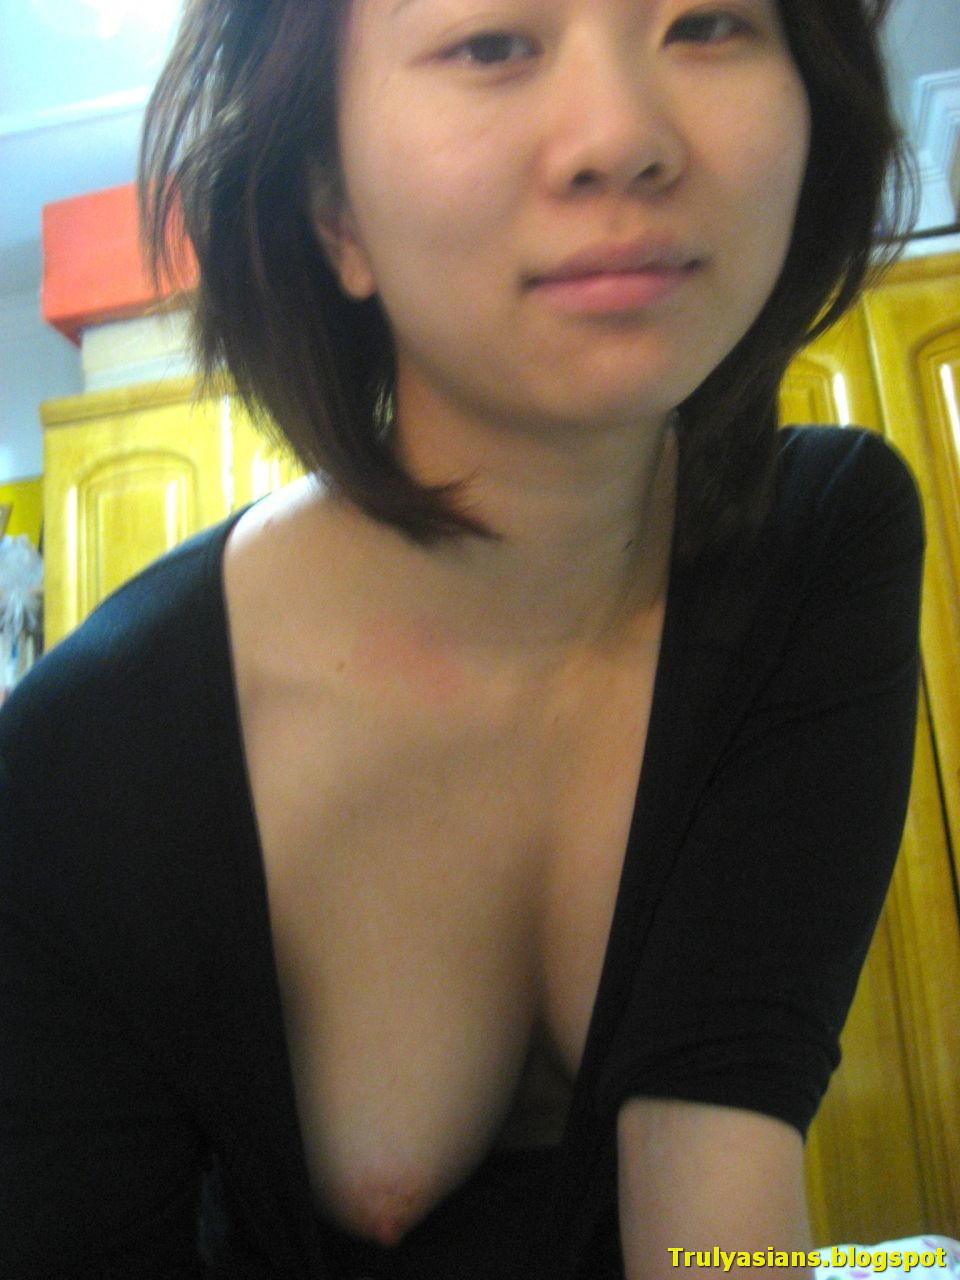 Malaysian Girl Anal - Malaysia Cute Chinese Girl Naked Pictures - PHOTO XXX